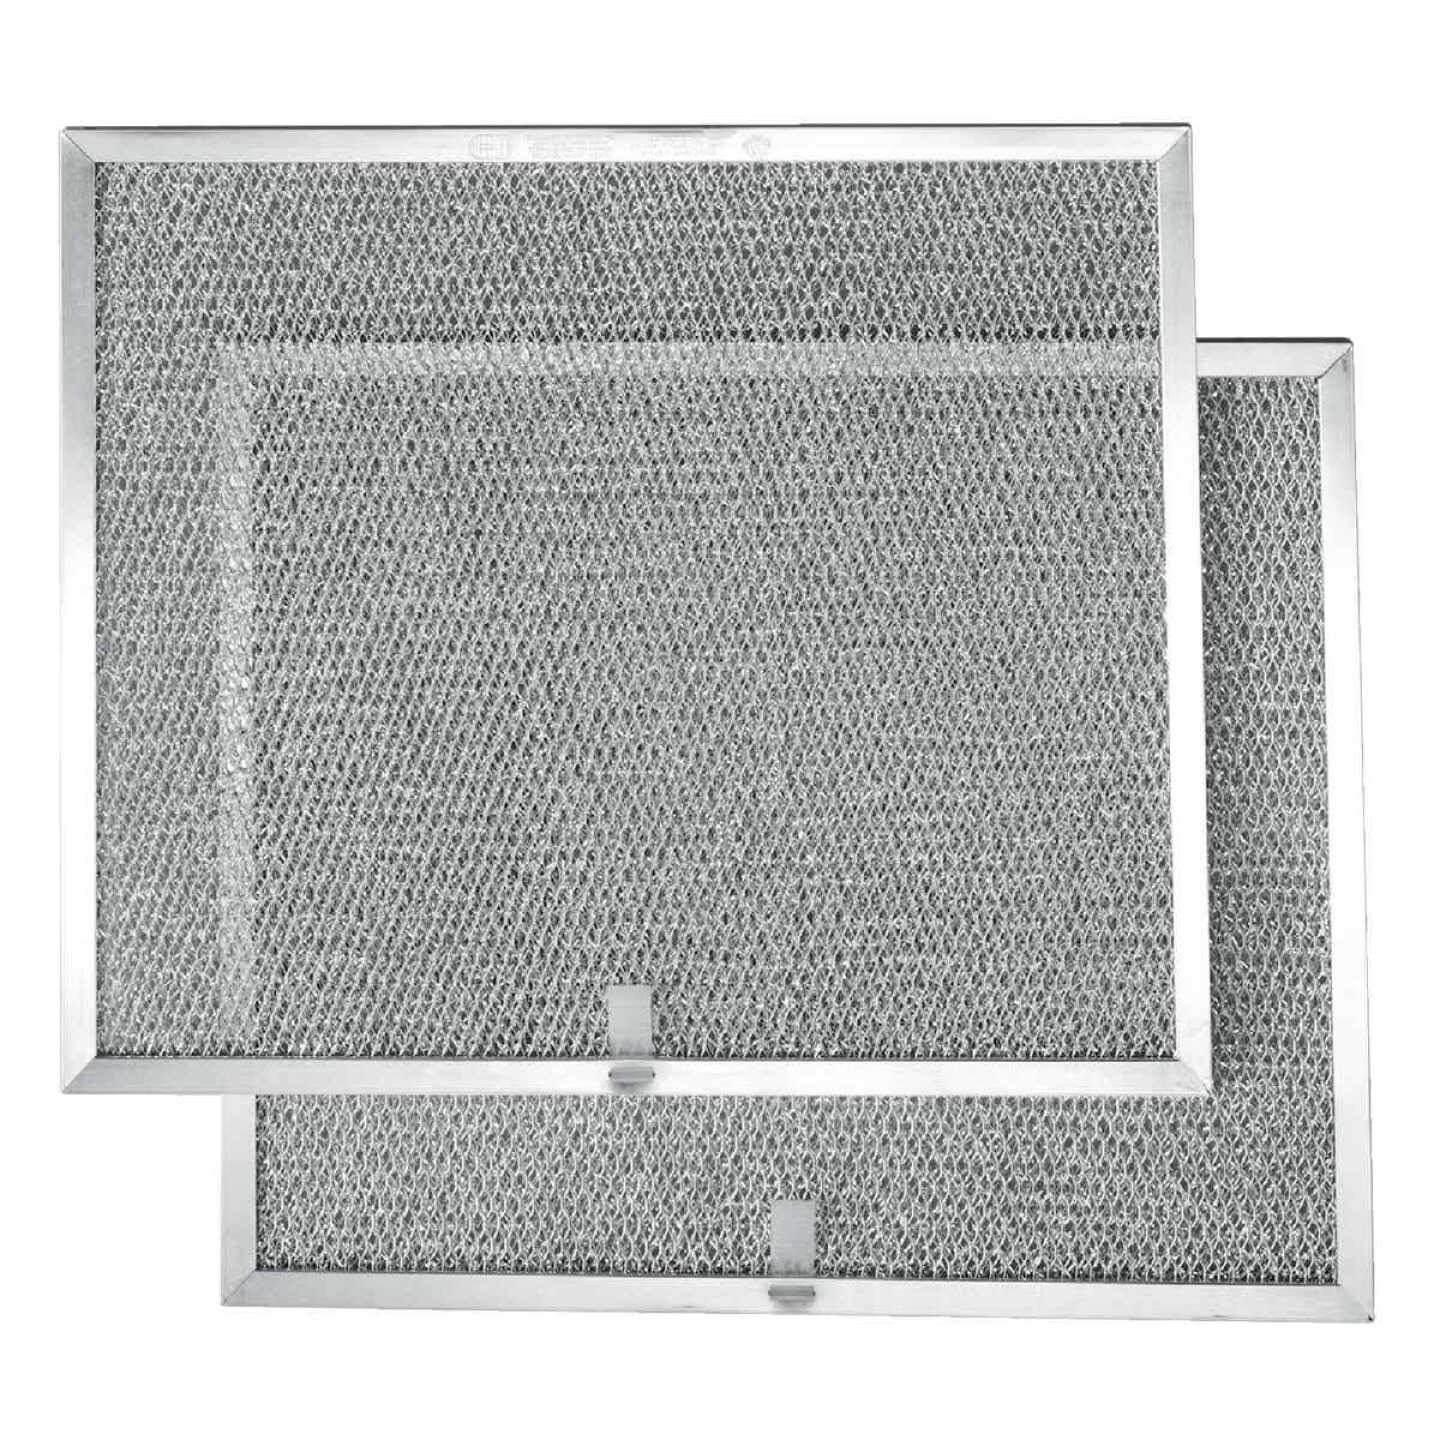 What Is A Range Hood Filter